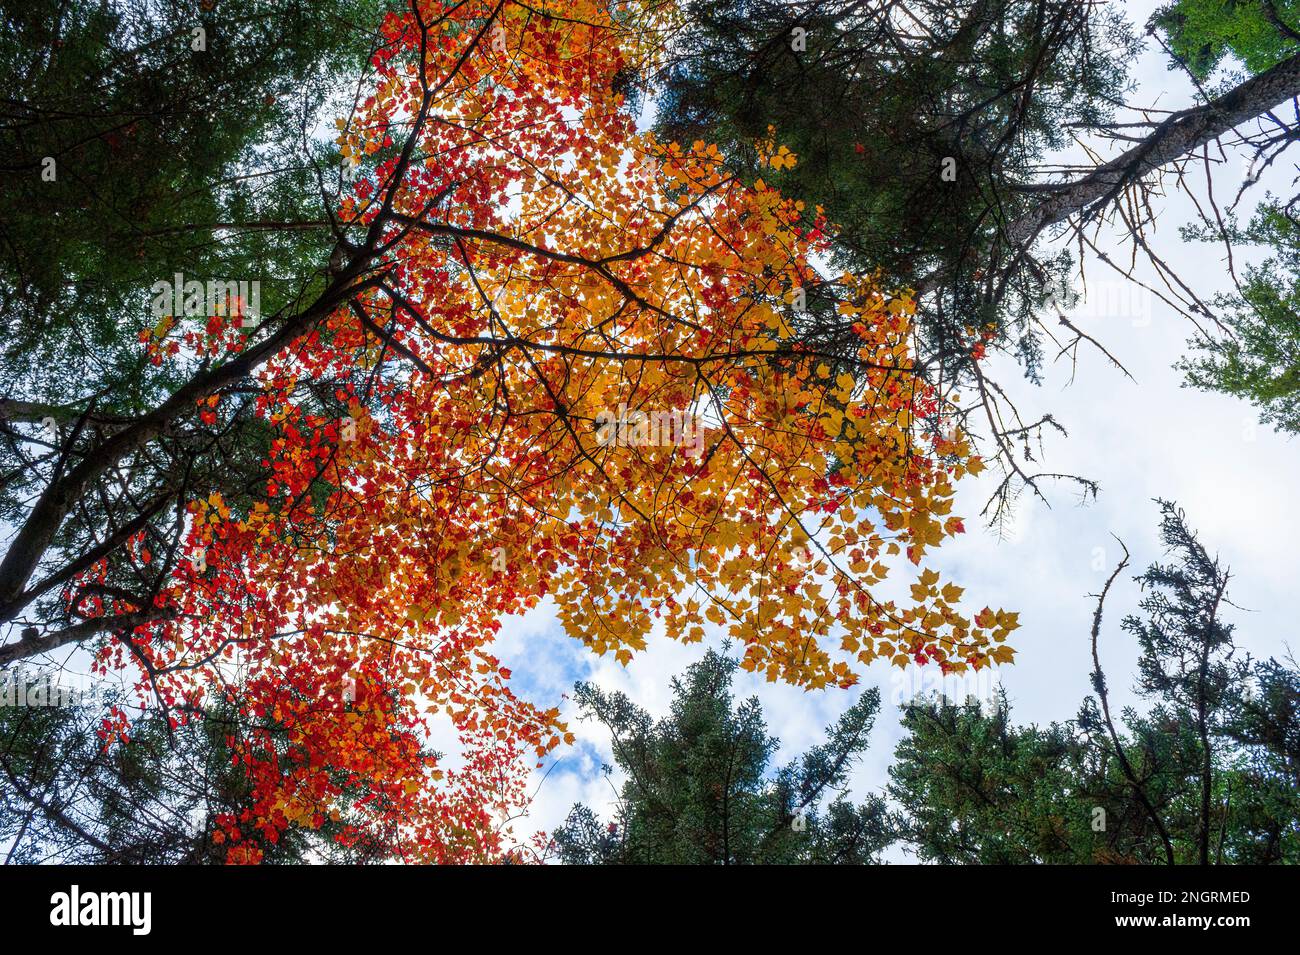 Canopy of a red maple tree at peak fall foliage, in golden and red colors, surrounded by hemlock trees. Borestone Mountain Audubon Sanctuary, Maine. Stock Photo